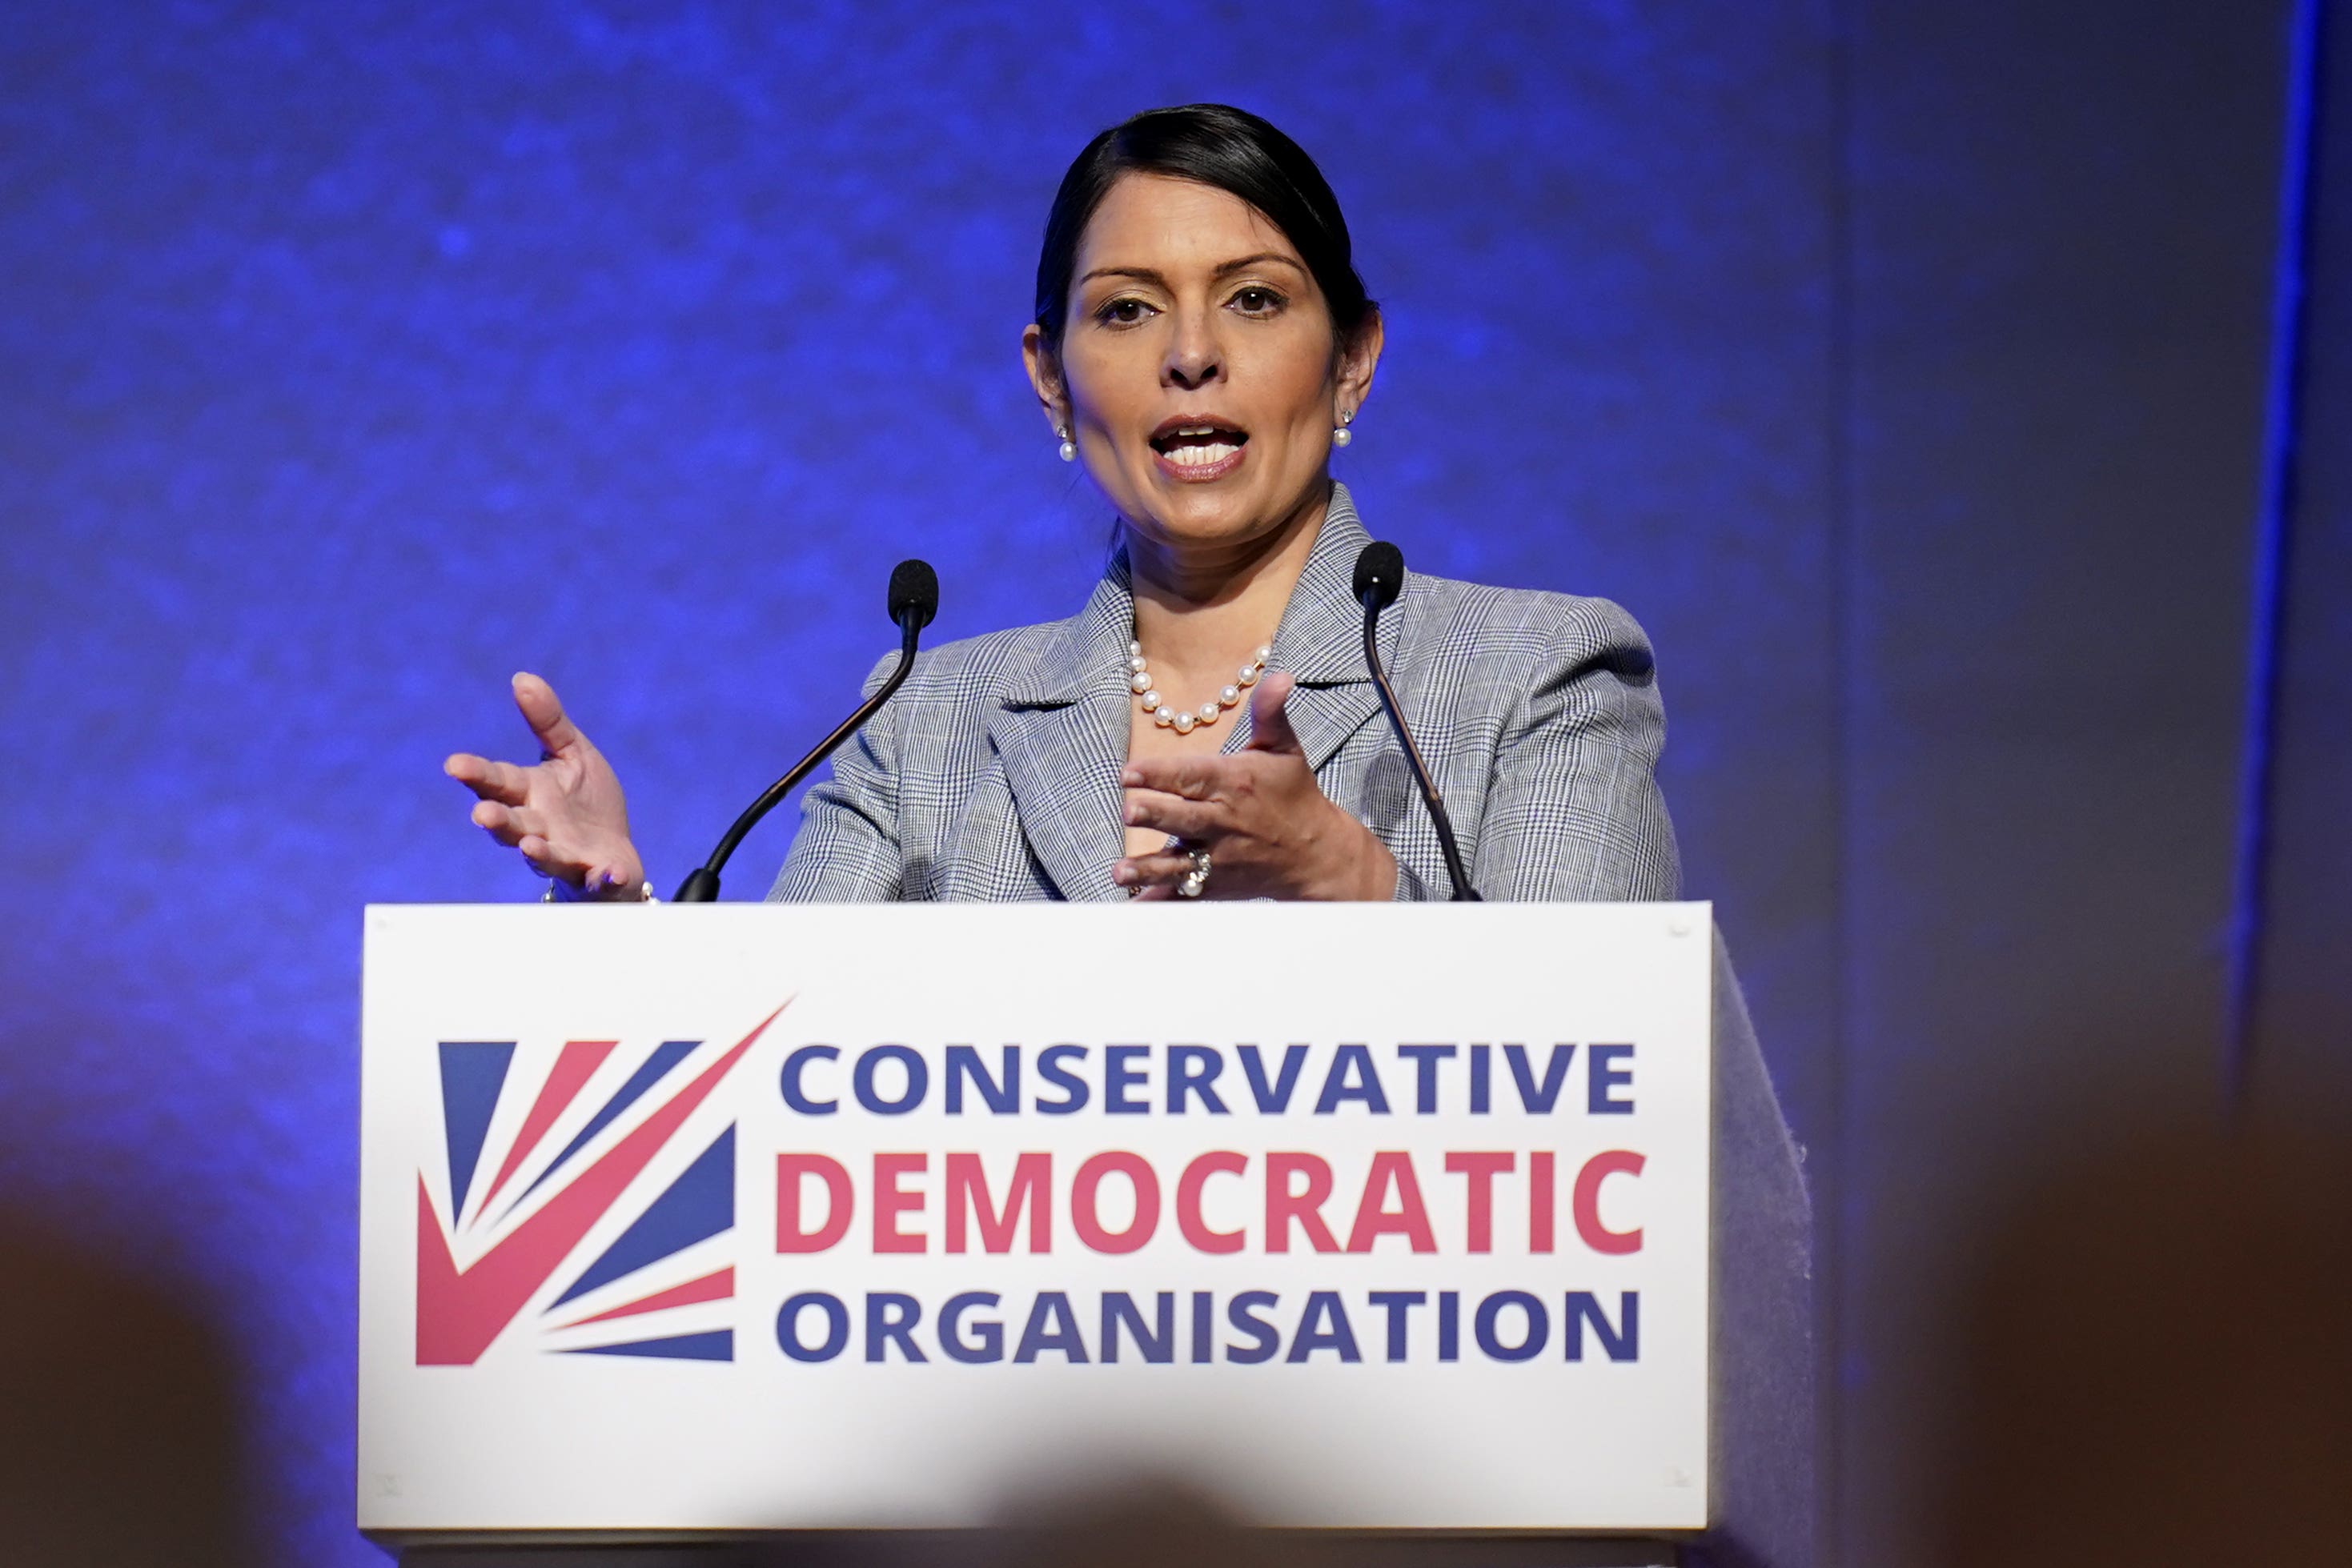 Priti Patel makes a speech during the Conservative Democratic Organisation conference in Bournemouth (Andrew Matthews/PA)